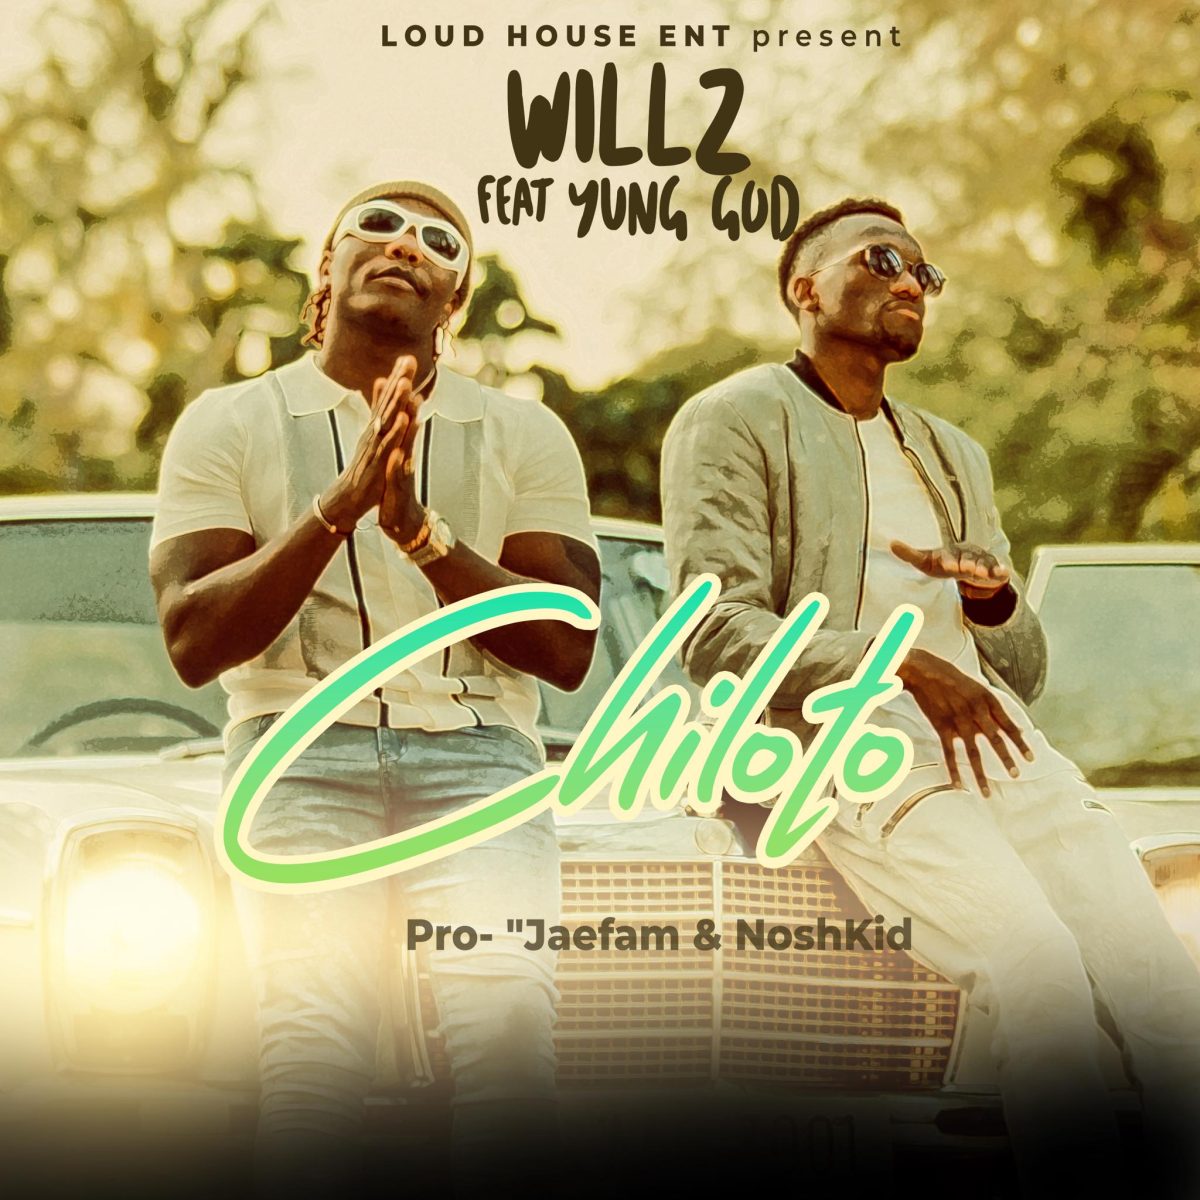 Willz ft. Yung God - Chiloto